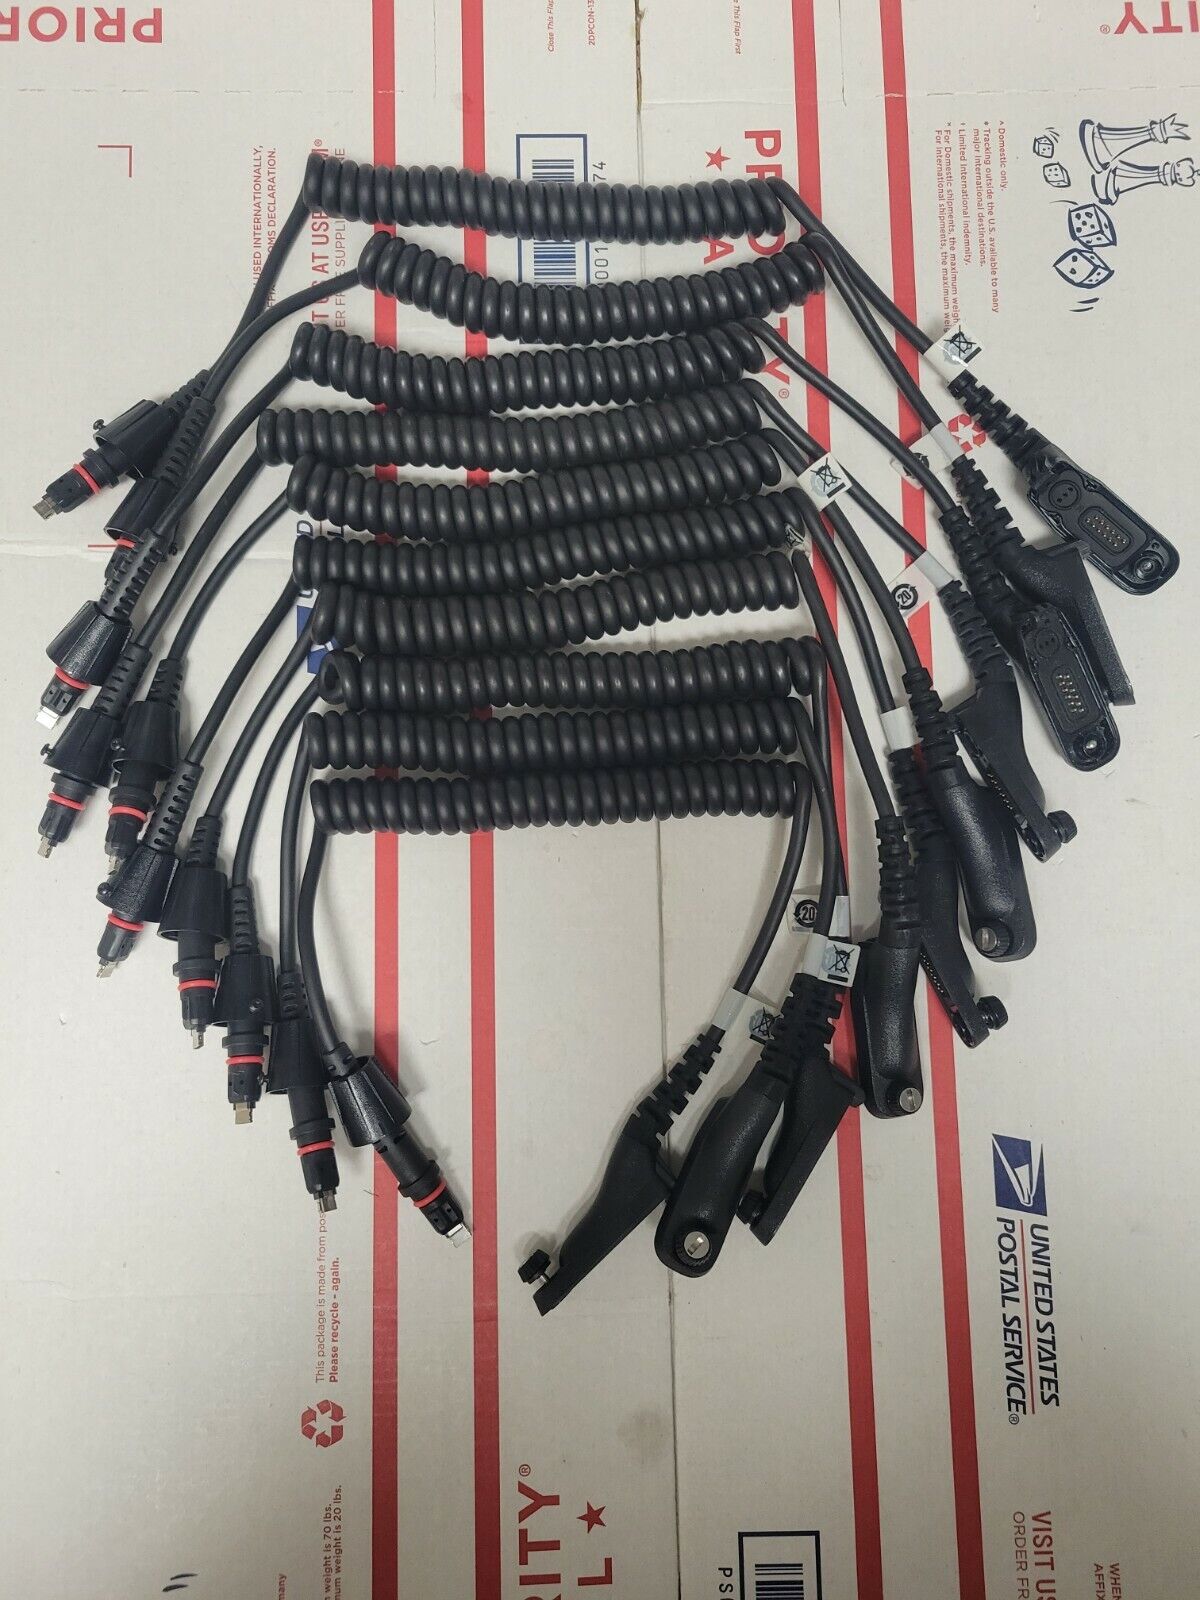 Lot of 10 Motorola RMS APX6000 APX7000 APX8000 Remote Speaker Mic Cables  Motorola